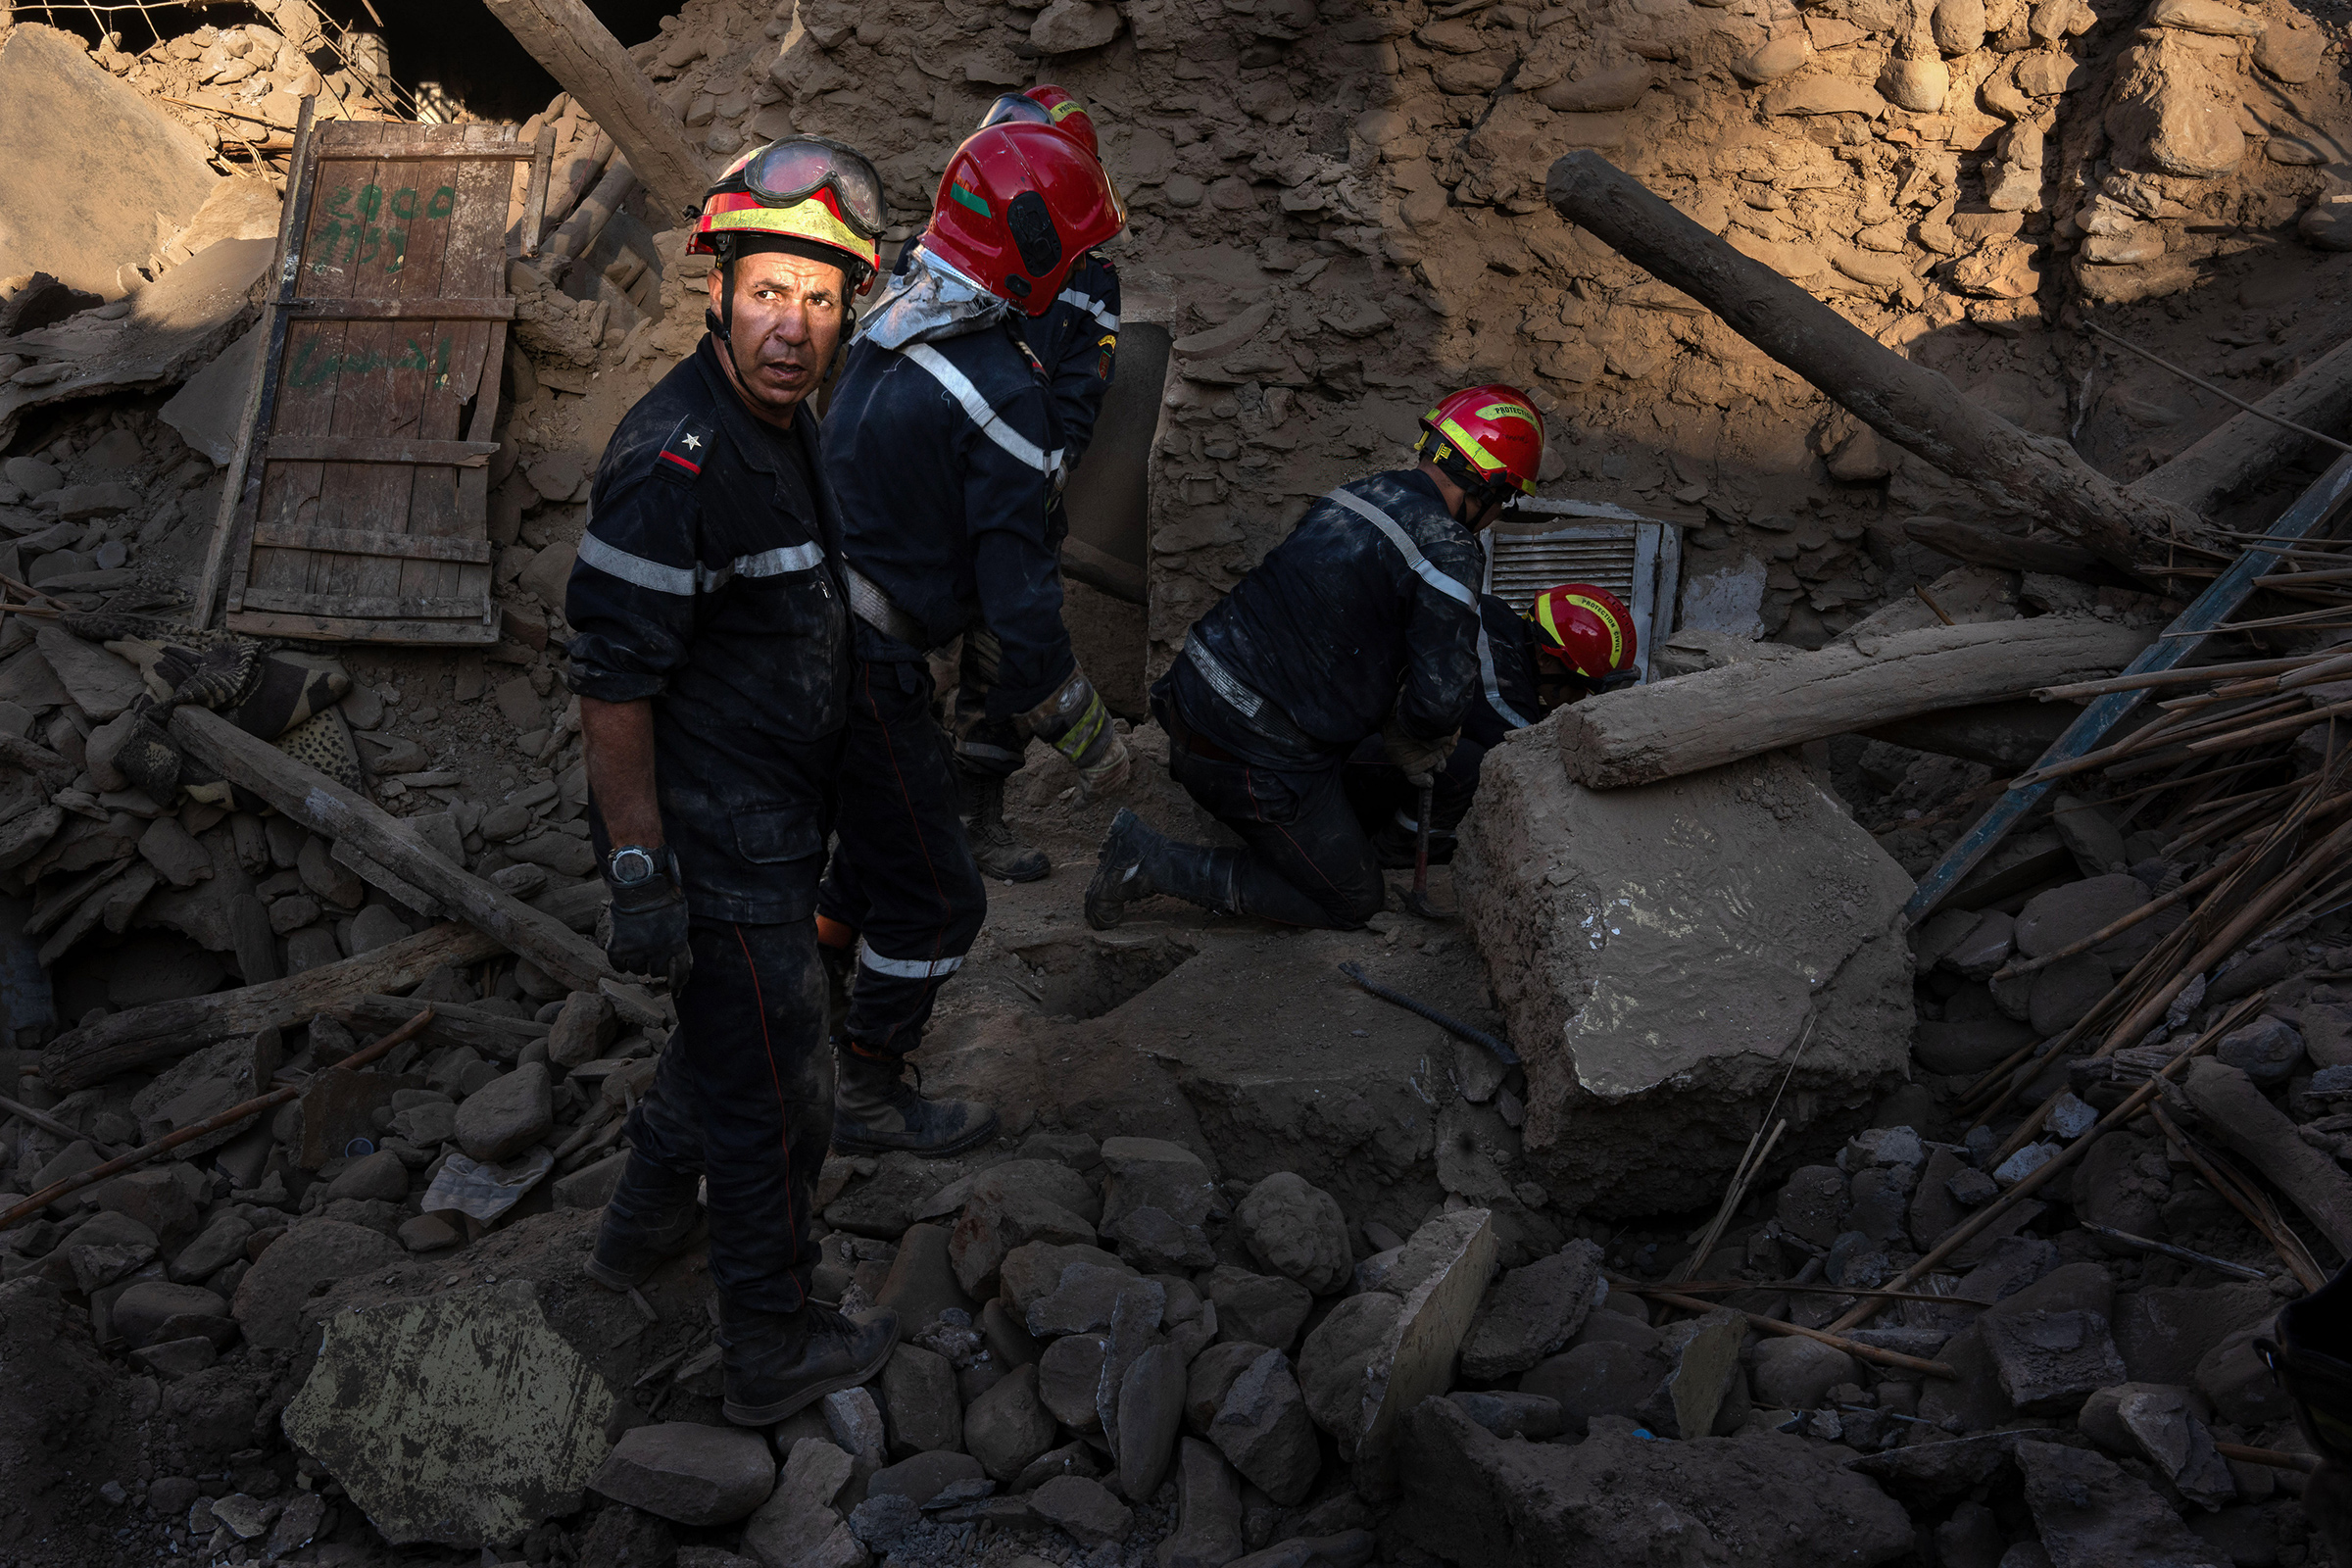 Moroccan firemen work to remove the bodies of people who were crushed to death when a cafe collapsed during the earthquake in Amizmiz on Sept. 10. (Ximena Borrazas—SOPA Images/LightRocket/Getty Images)